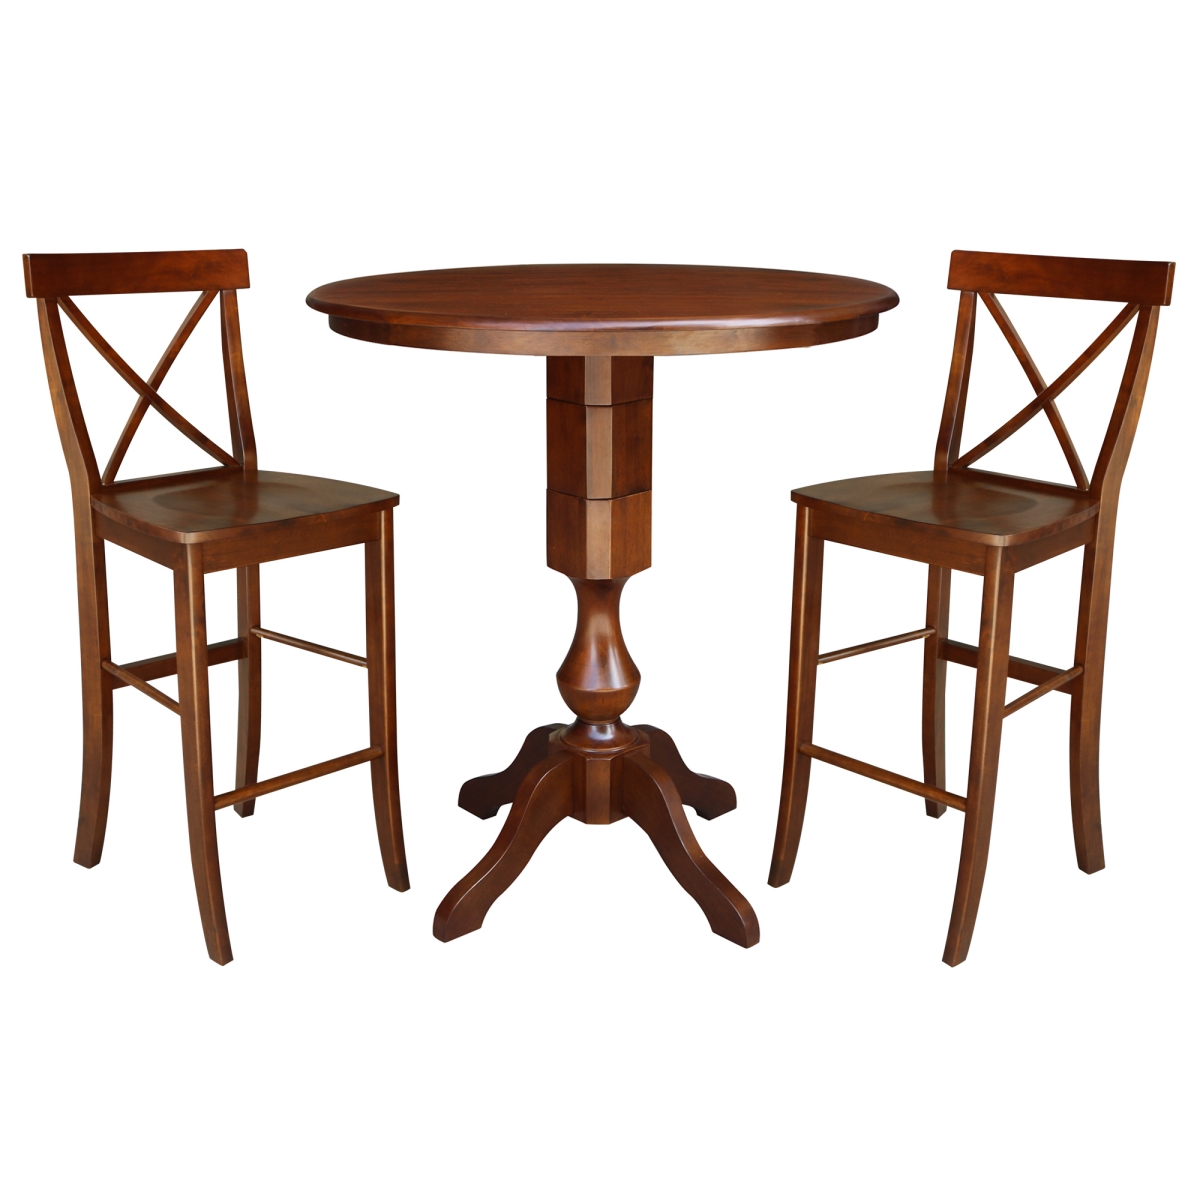 K581-36rt-11-s6133-2 36 In. Round Pedestal Bar Height Table With 2 Stools, Espresso - 3 Piece